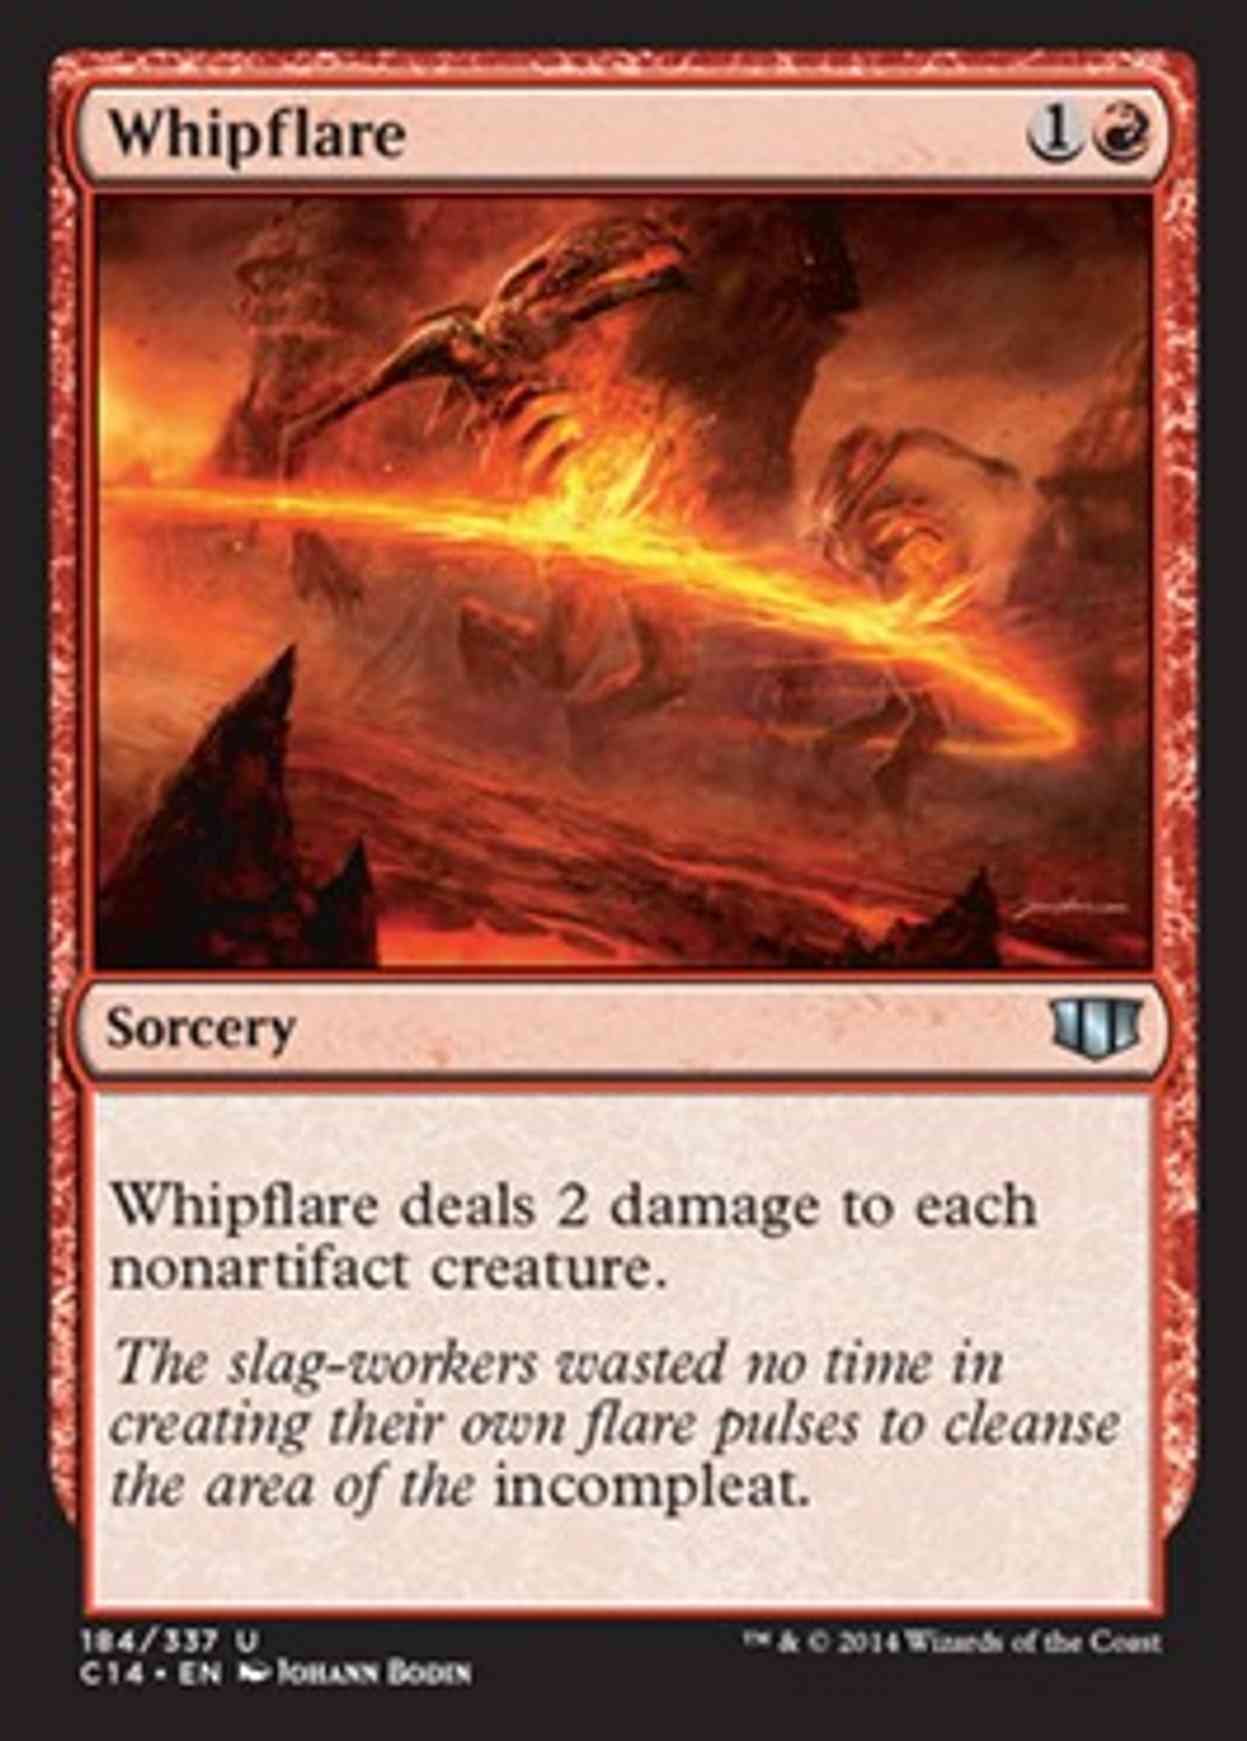 Whipflare magic card front